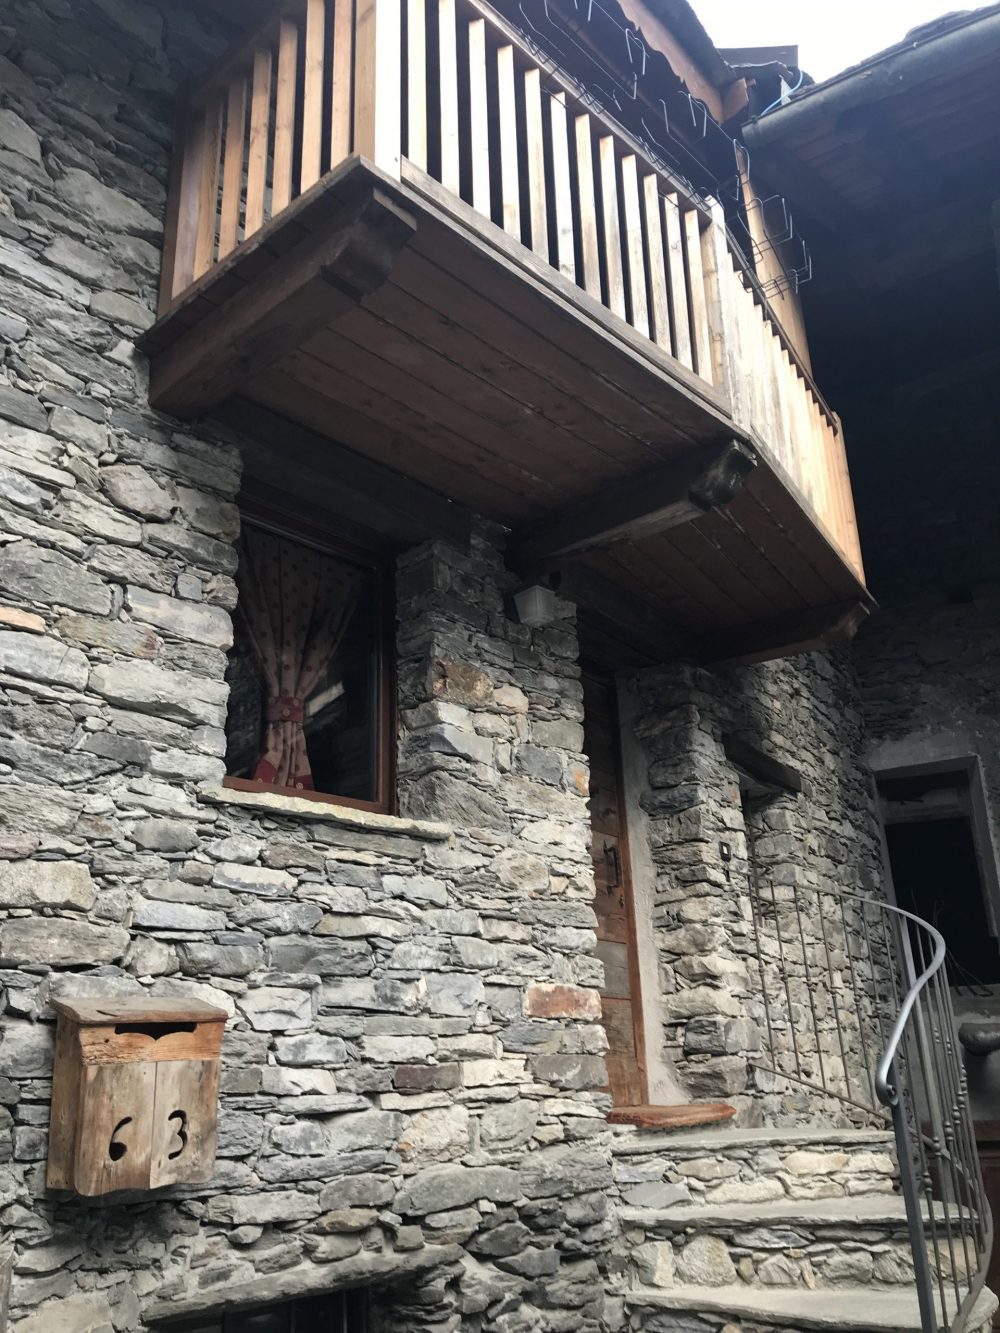 The front of the house in La Salle. My experience of buying a home in the Italian Alps.